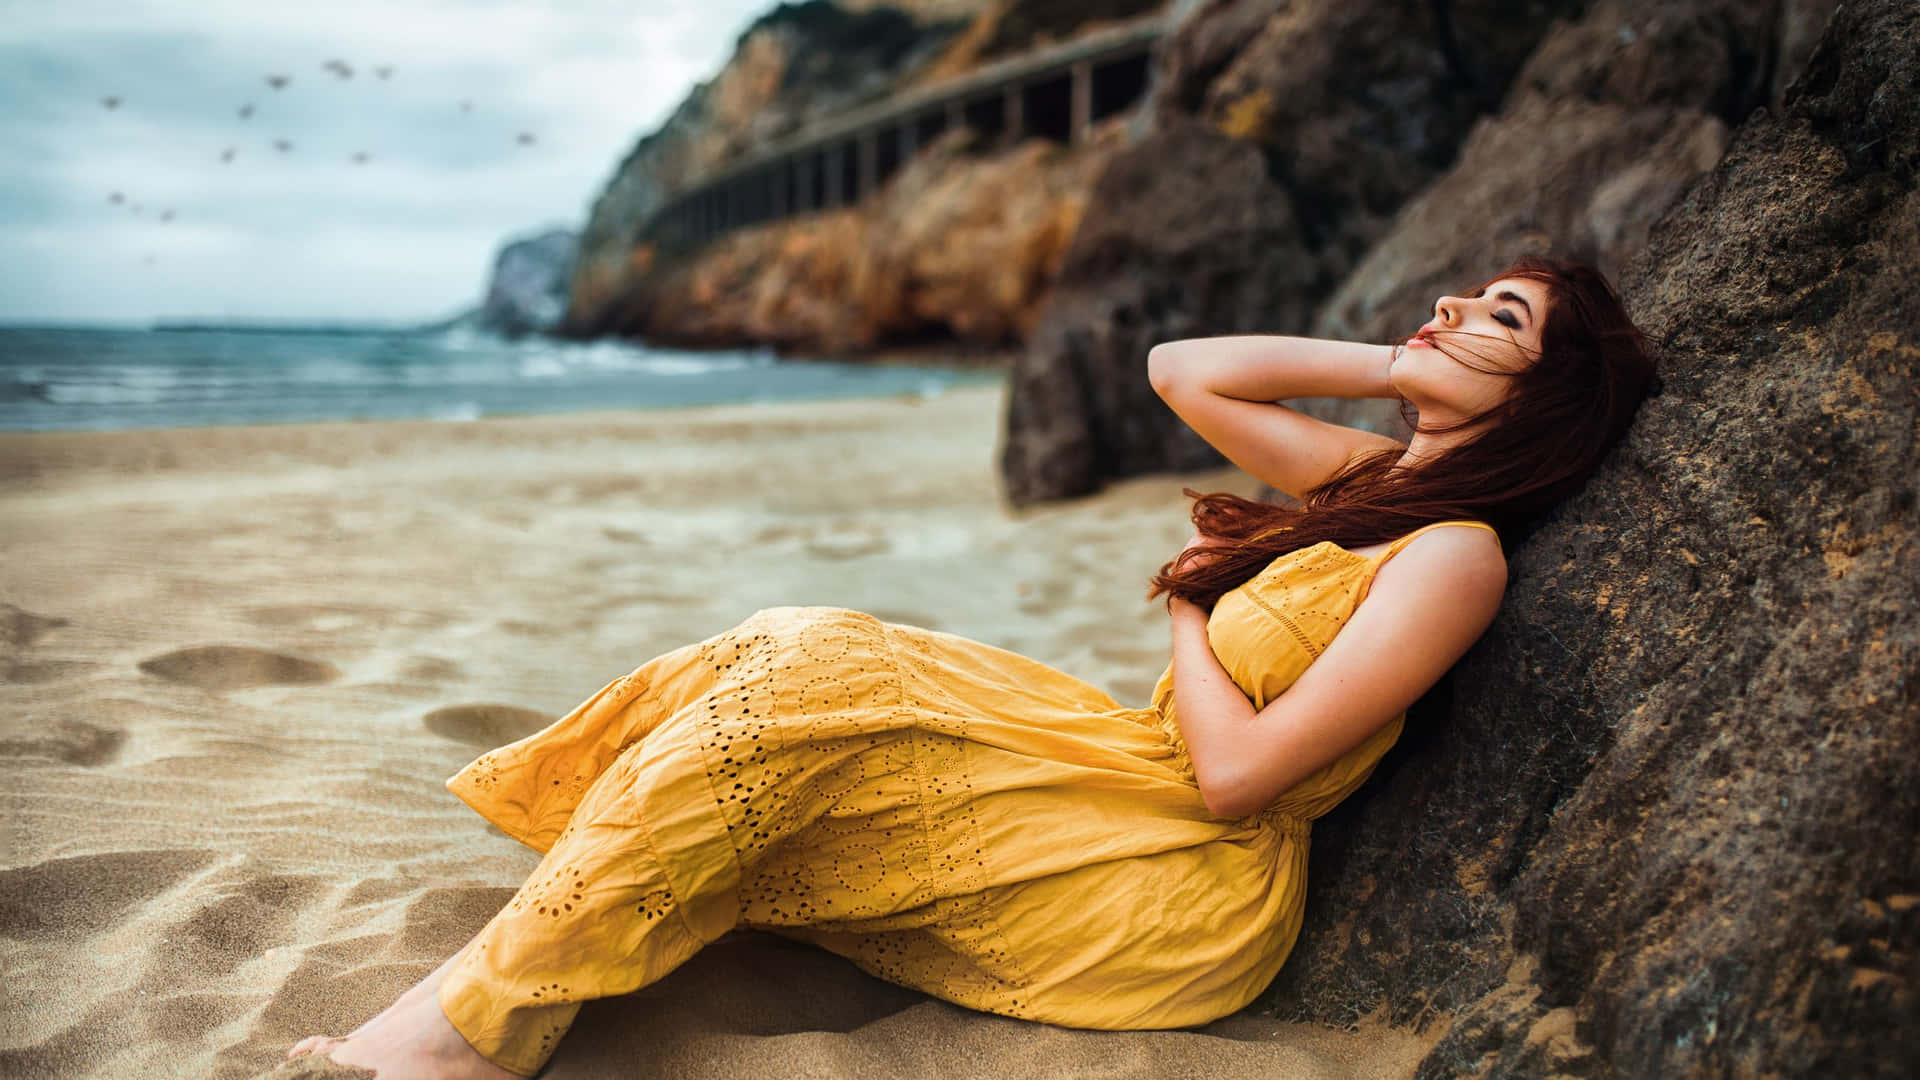 Captivating Woman Gazing At The Horizon On A Beach Background